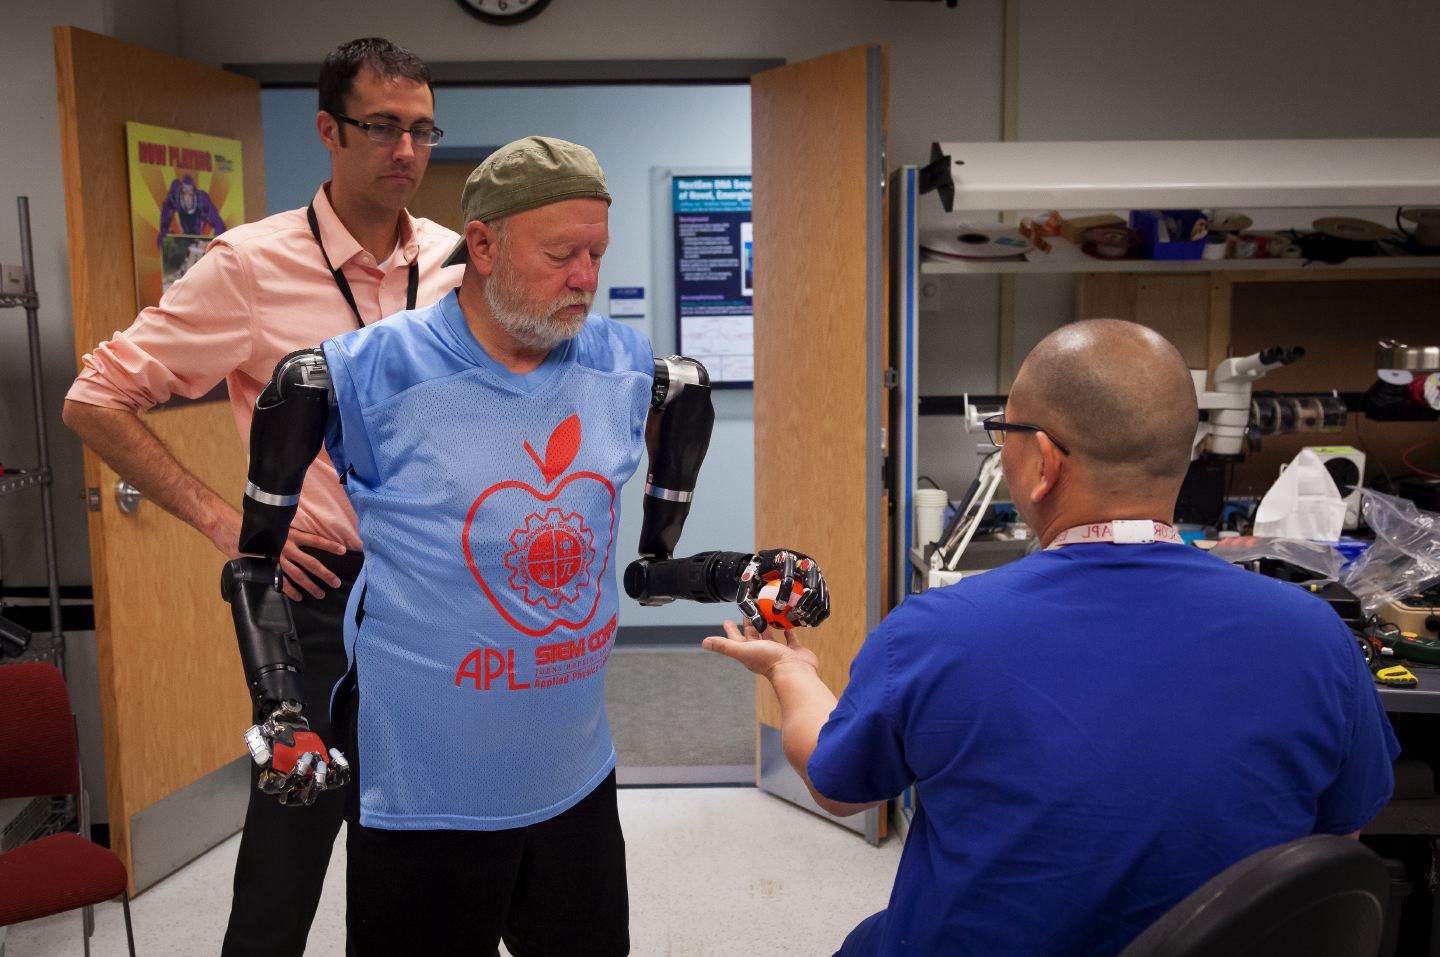 Les Baugh, a Colorado man, makes history at the Lab when he becomes the first bilateral shoulder-level amputee to wear and simultaneously control two of the Laboratory’s Modular Prosthetic Limbs.